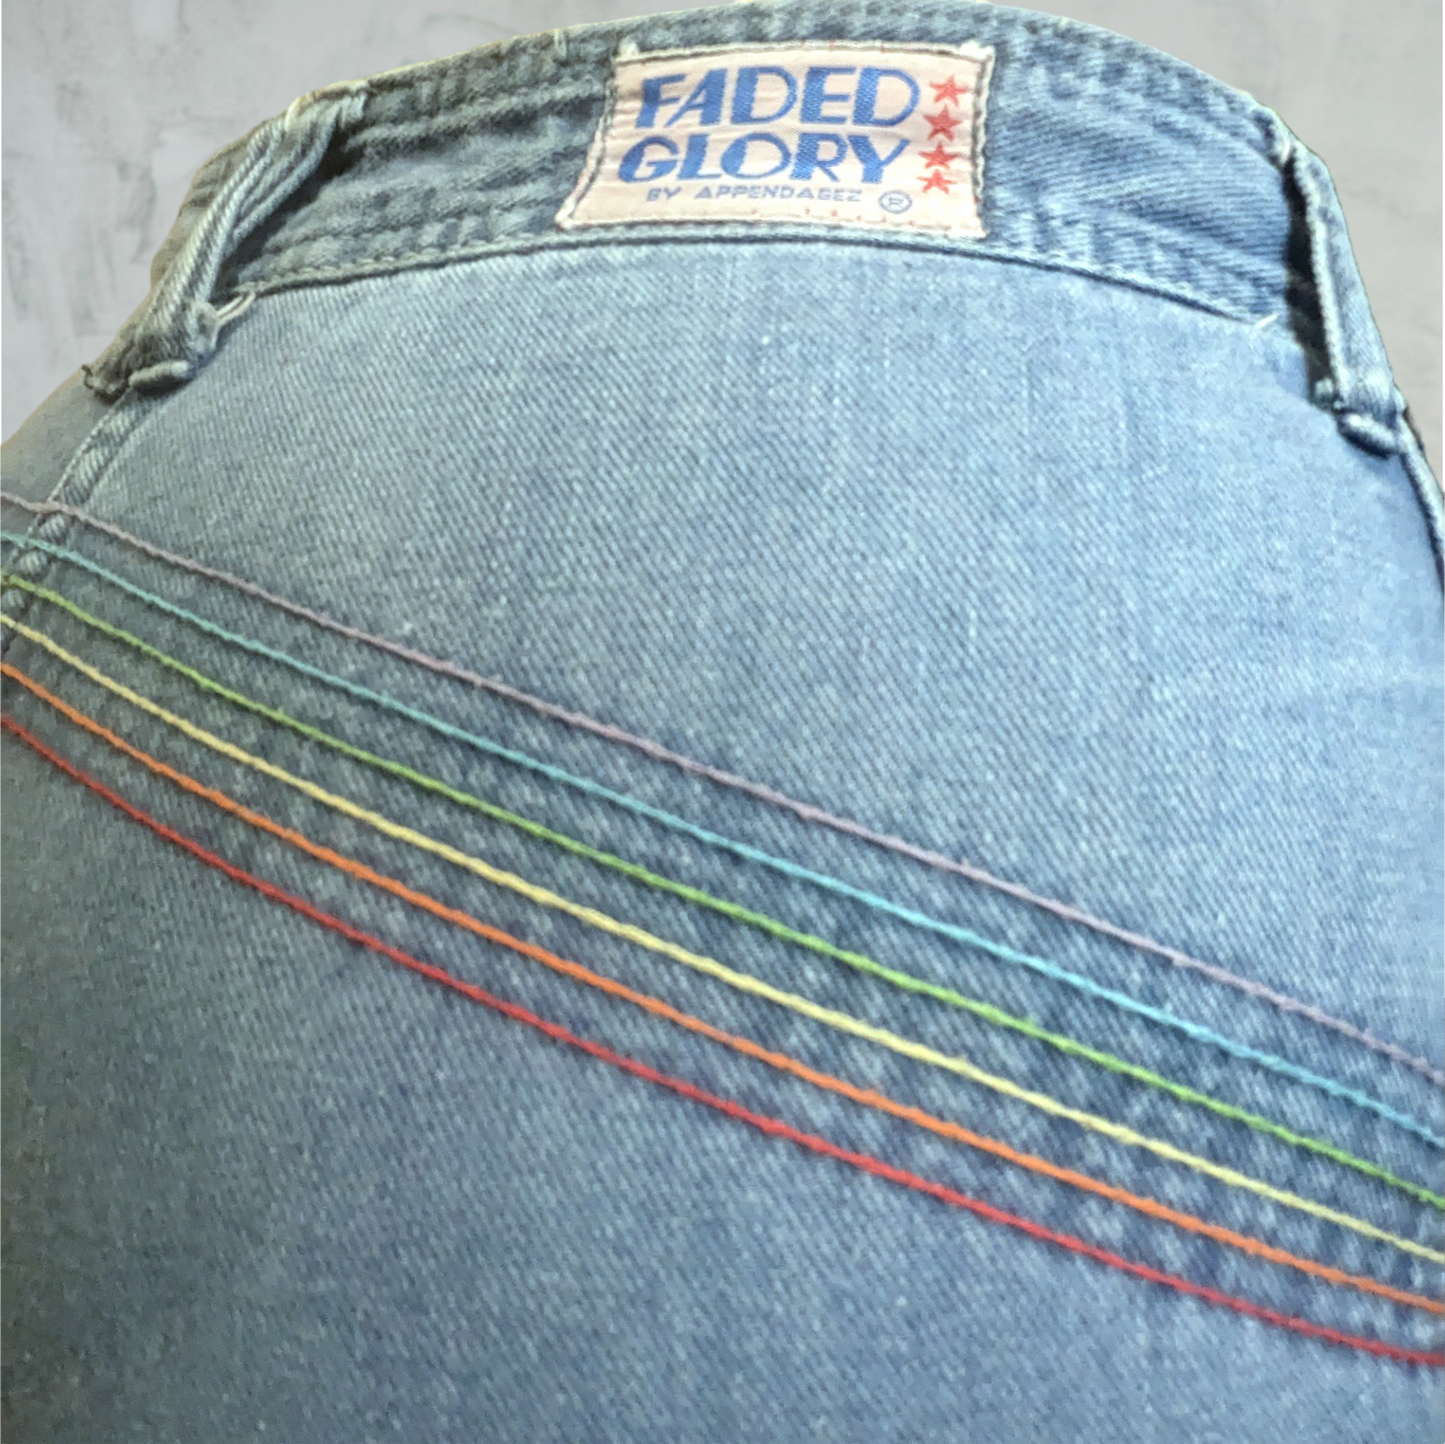 Vintage Faded Glory Bell Bottom Rainbow Embroidered Flare Jeans 1970's